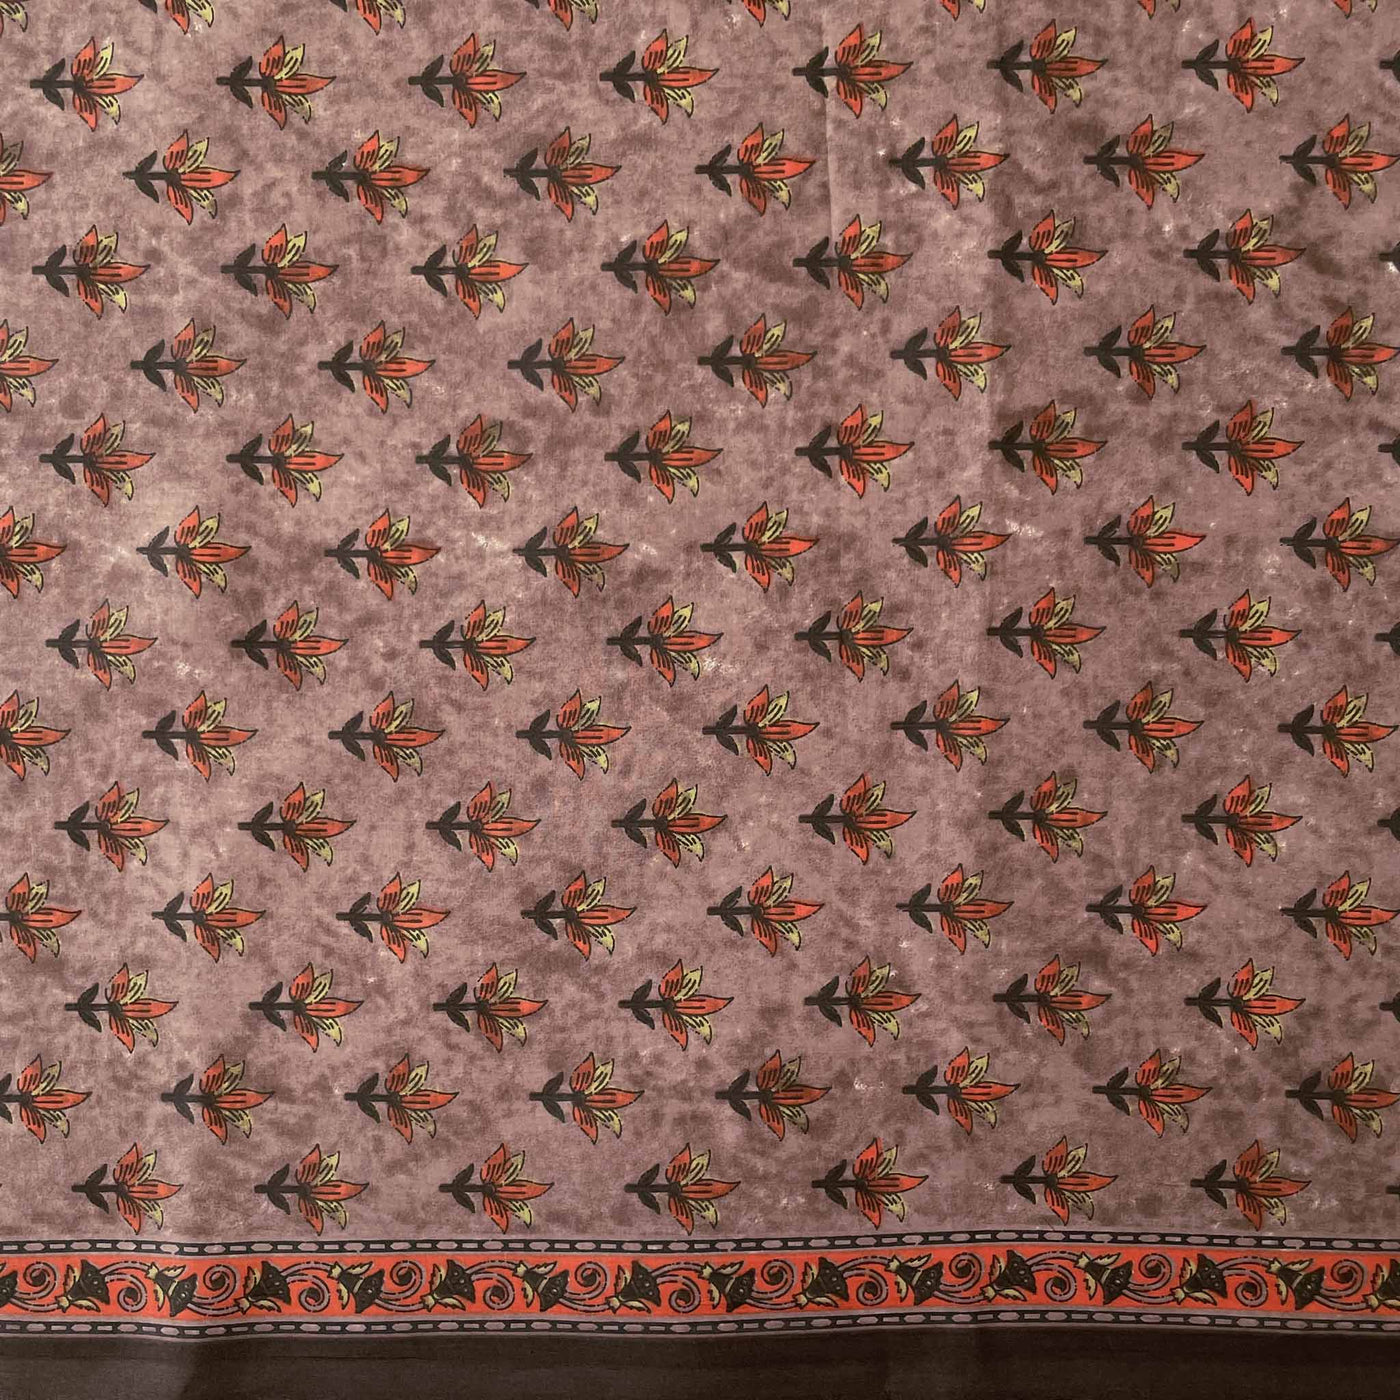 Fabric Pandit Fabric Dusty Mauve The Autum Flora Hand Block Printed Pure Cotton Fabirc Width (43 inches)